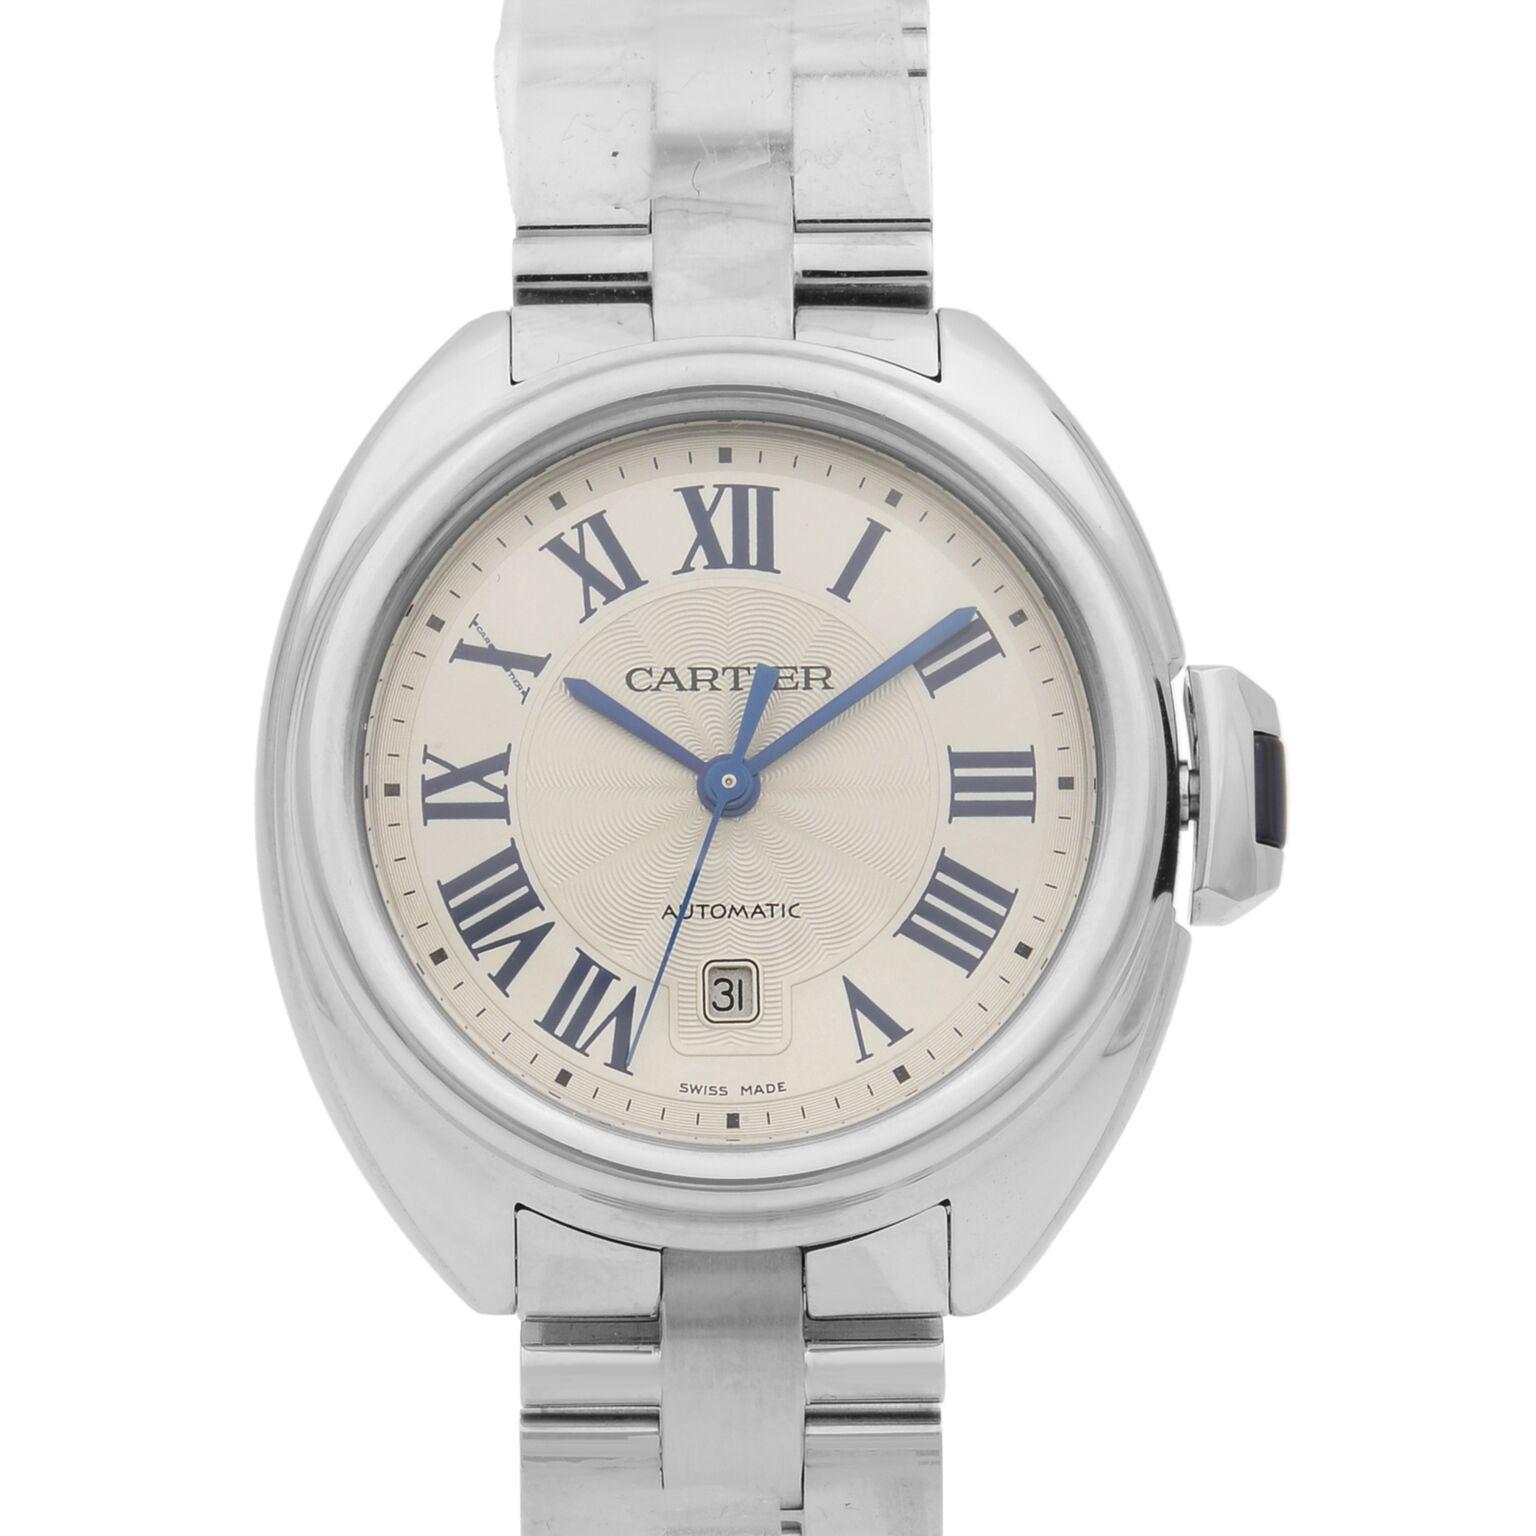 This never been worn Cartier Cle De Cartier WSCL0005 is a beautiful Ladie's timepiece that is powered by mechanical (automatic) movement which is cased in a stainless steel case. It has a round shape face, date indicator dial and has roman numerals